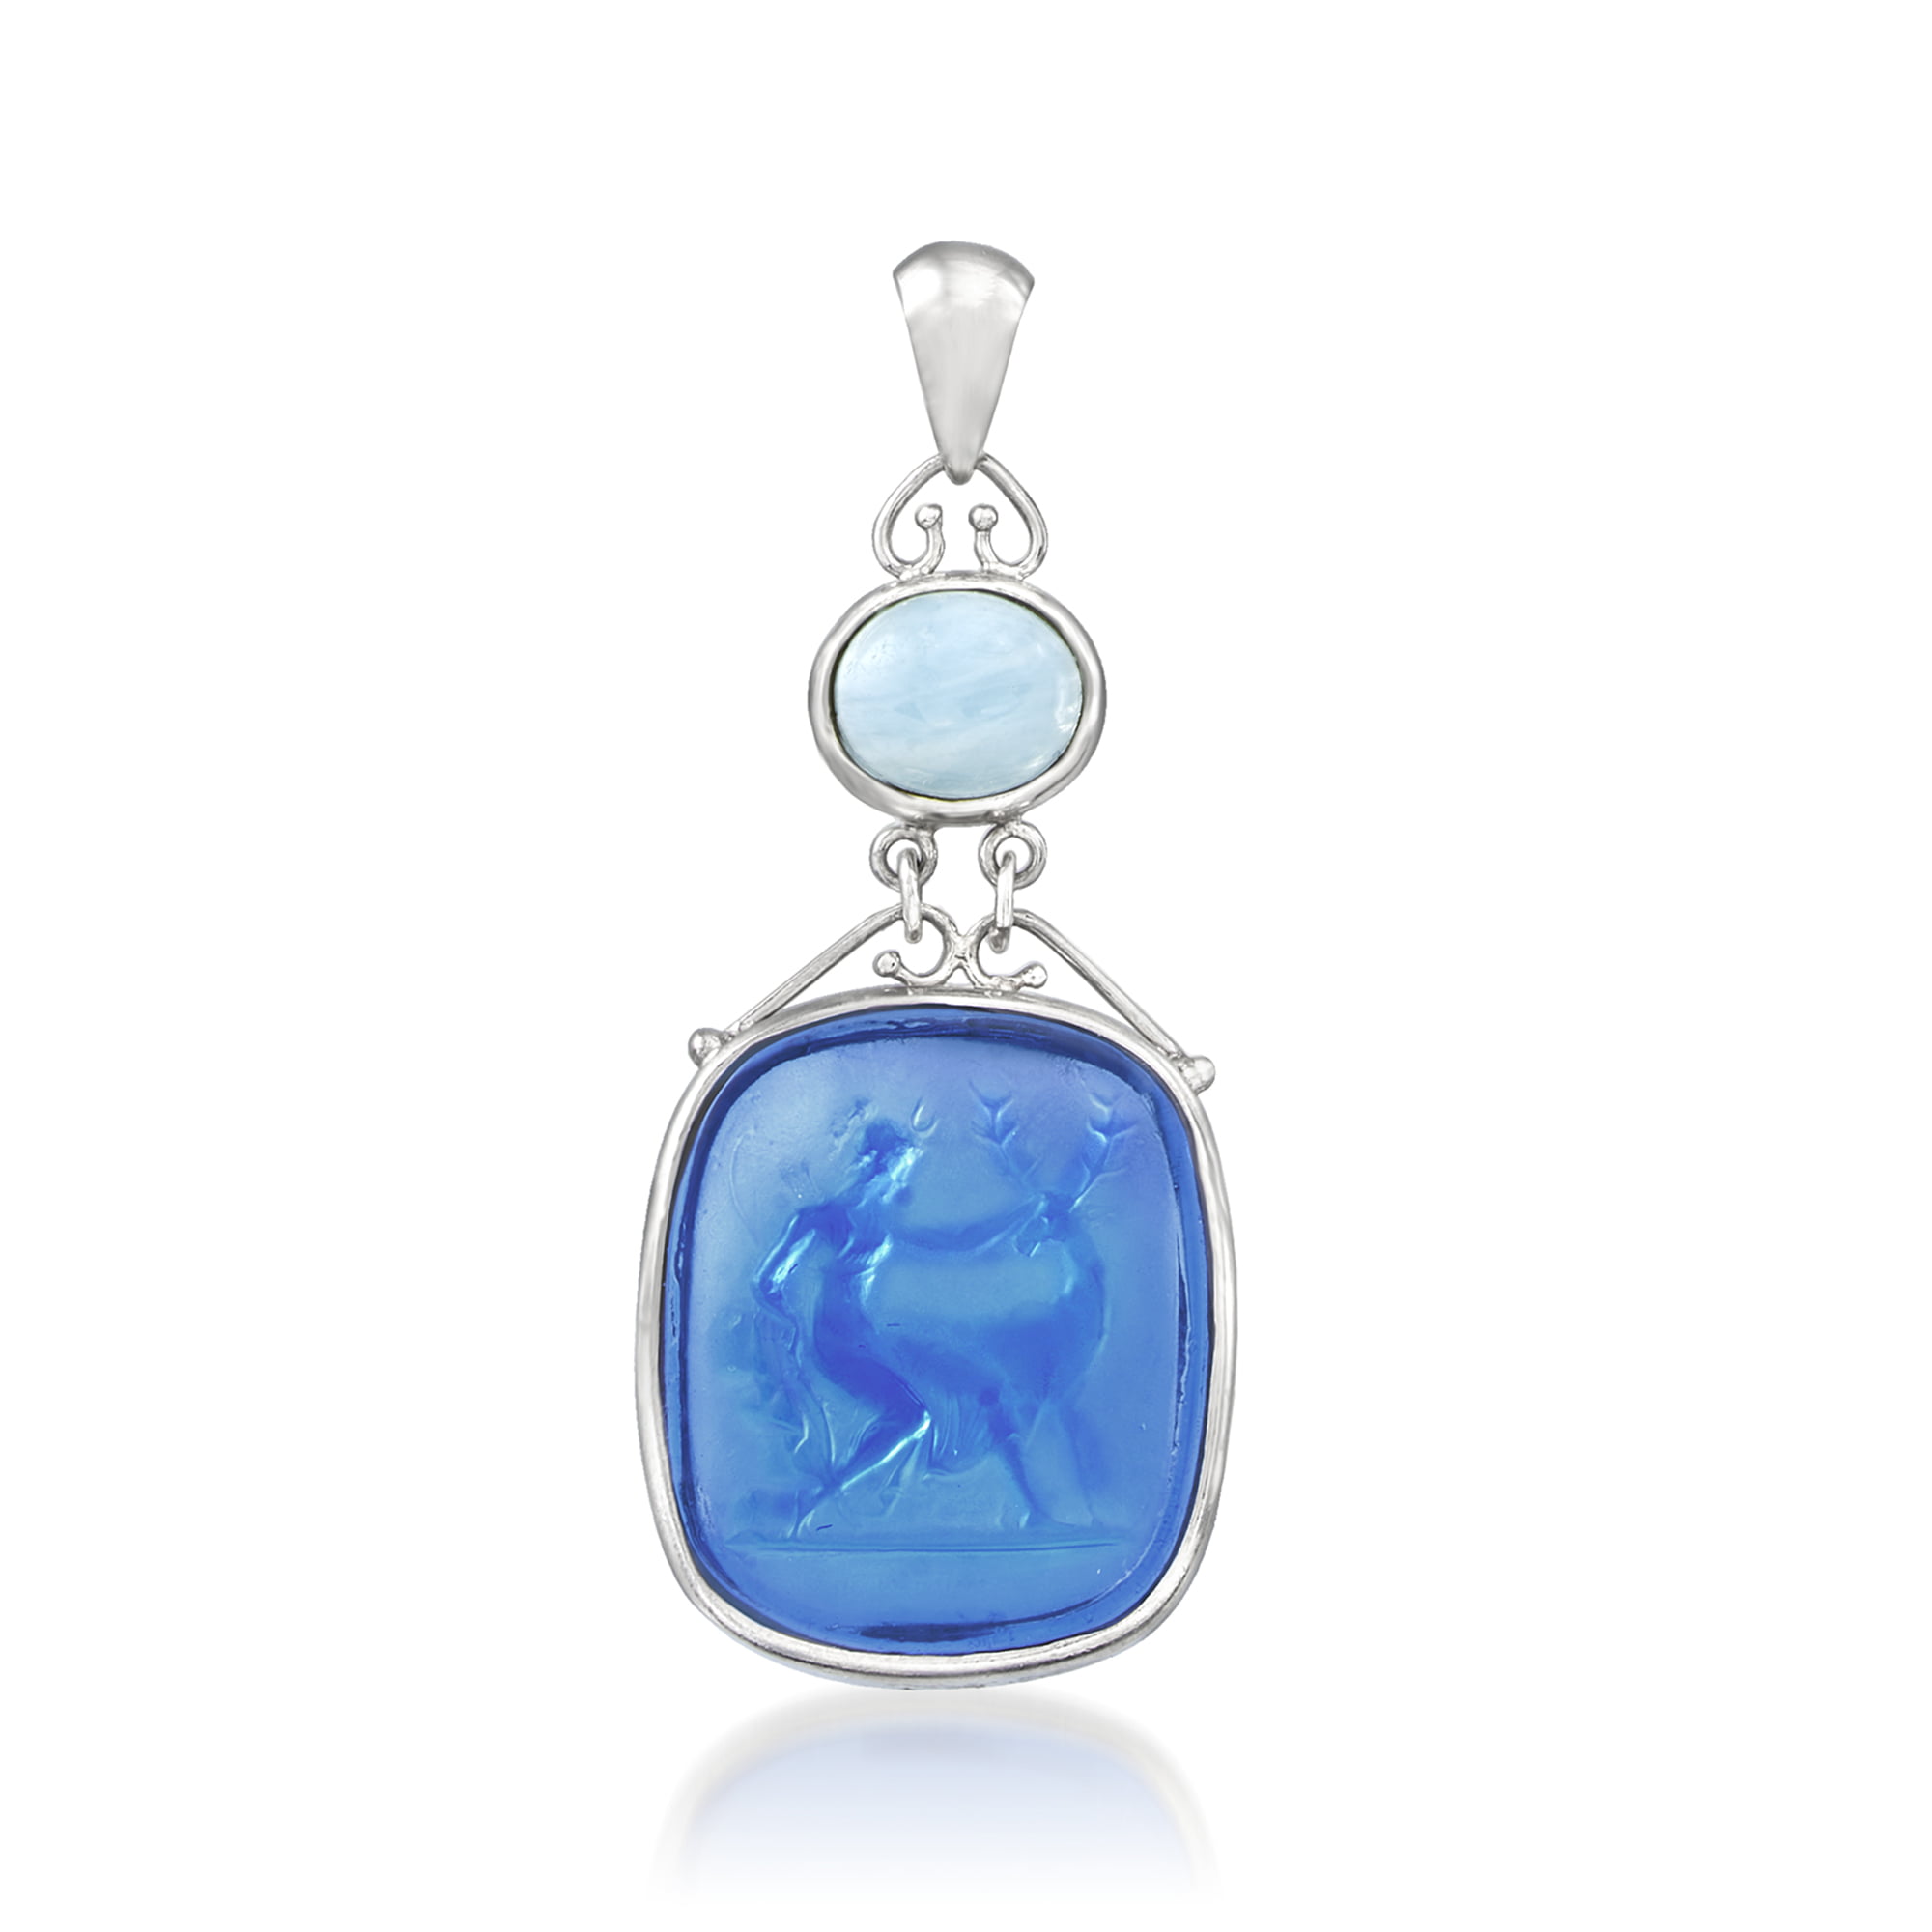 Ross-Simons Blue Venetian Glass Intaglio Pendant With 2.50 Carat Aquamarine  From Italy in Sterling Silver